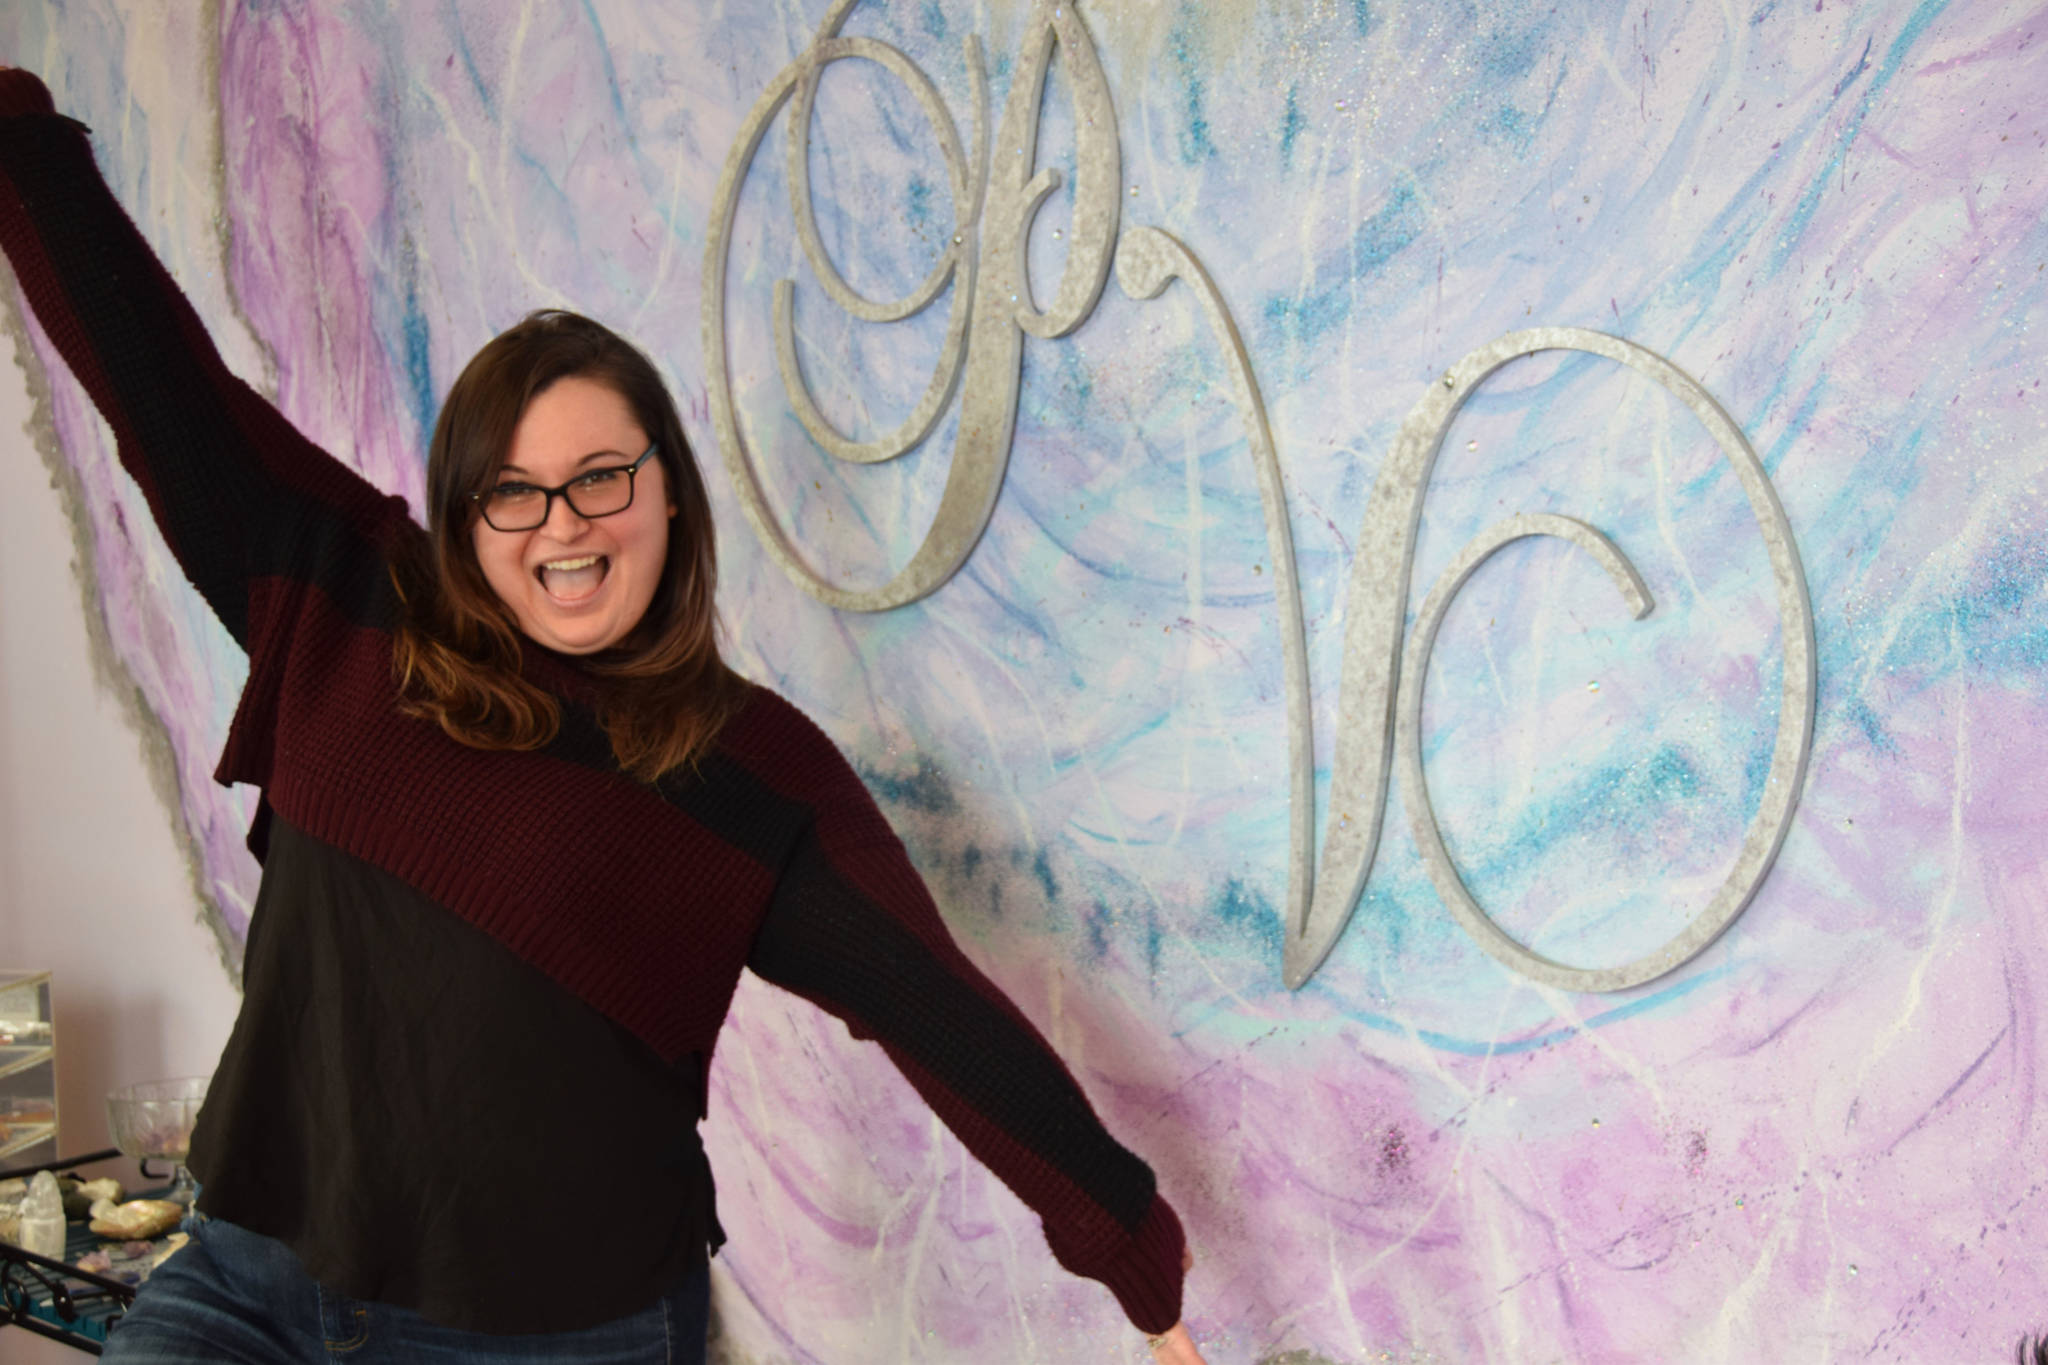 Local business owner Kylee Swircenski poses in front of the logo of her store, Positive Vibe, on Wednesday, Jan. 30, 2019 in Kenai. (Photo by Brian Mazurek/Peninsula Clarion)